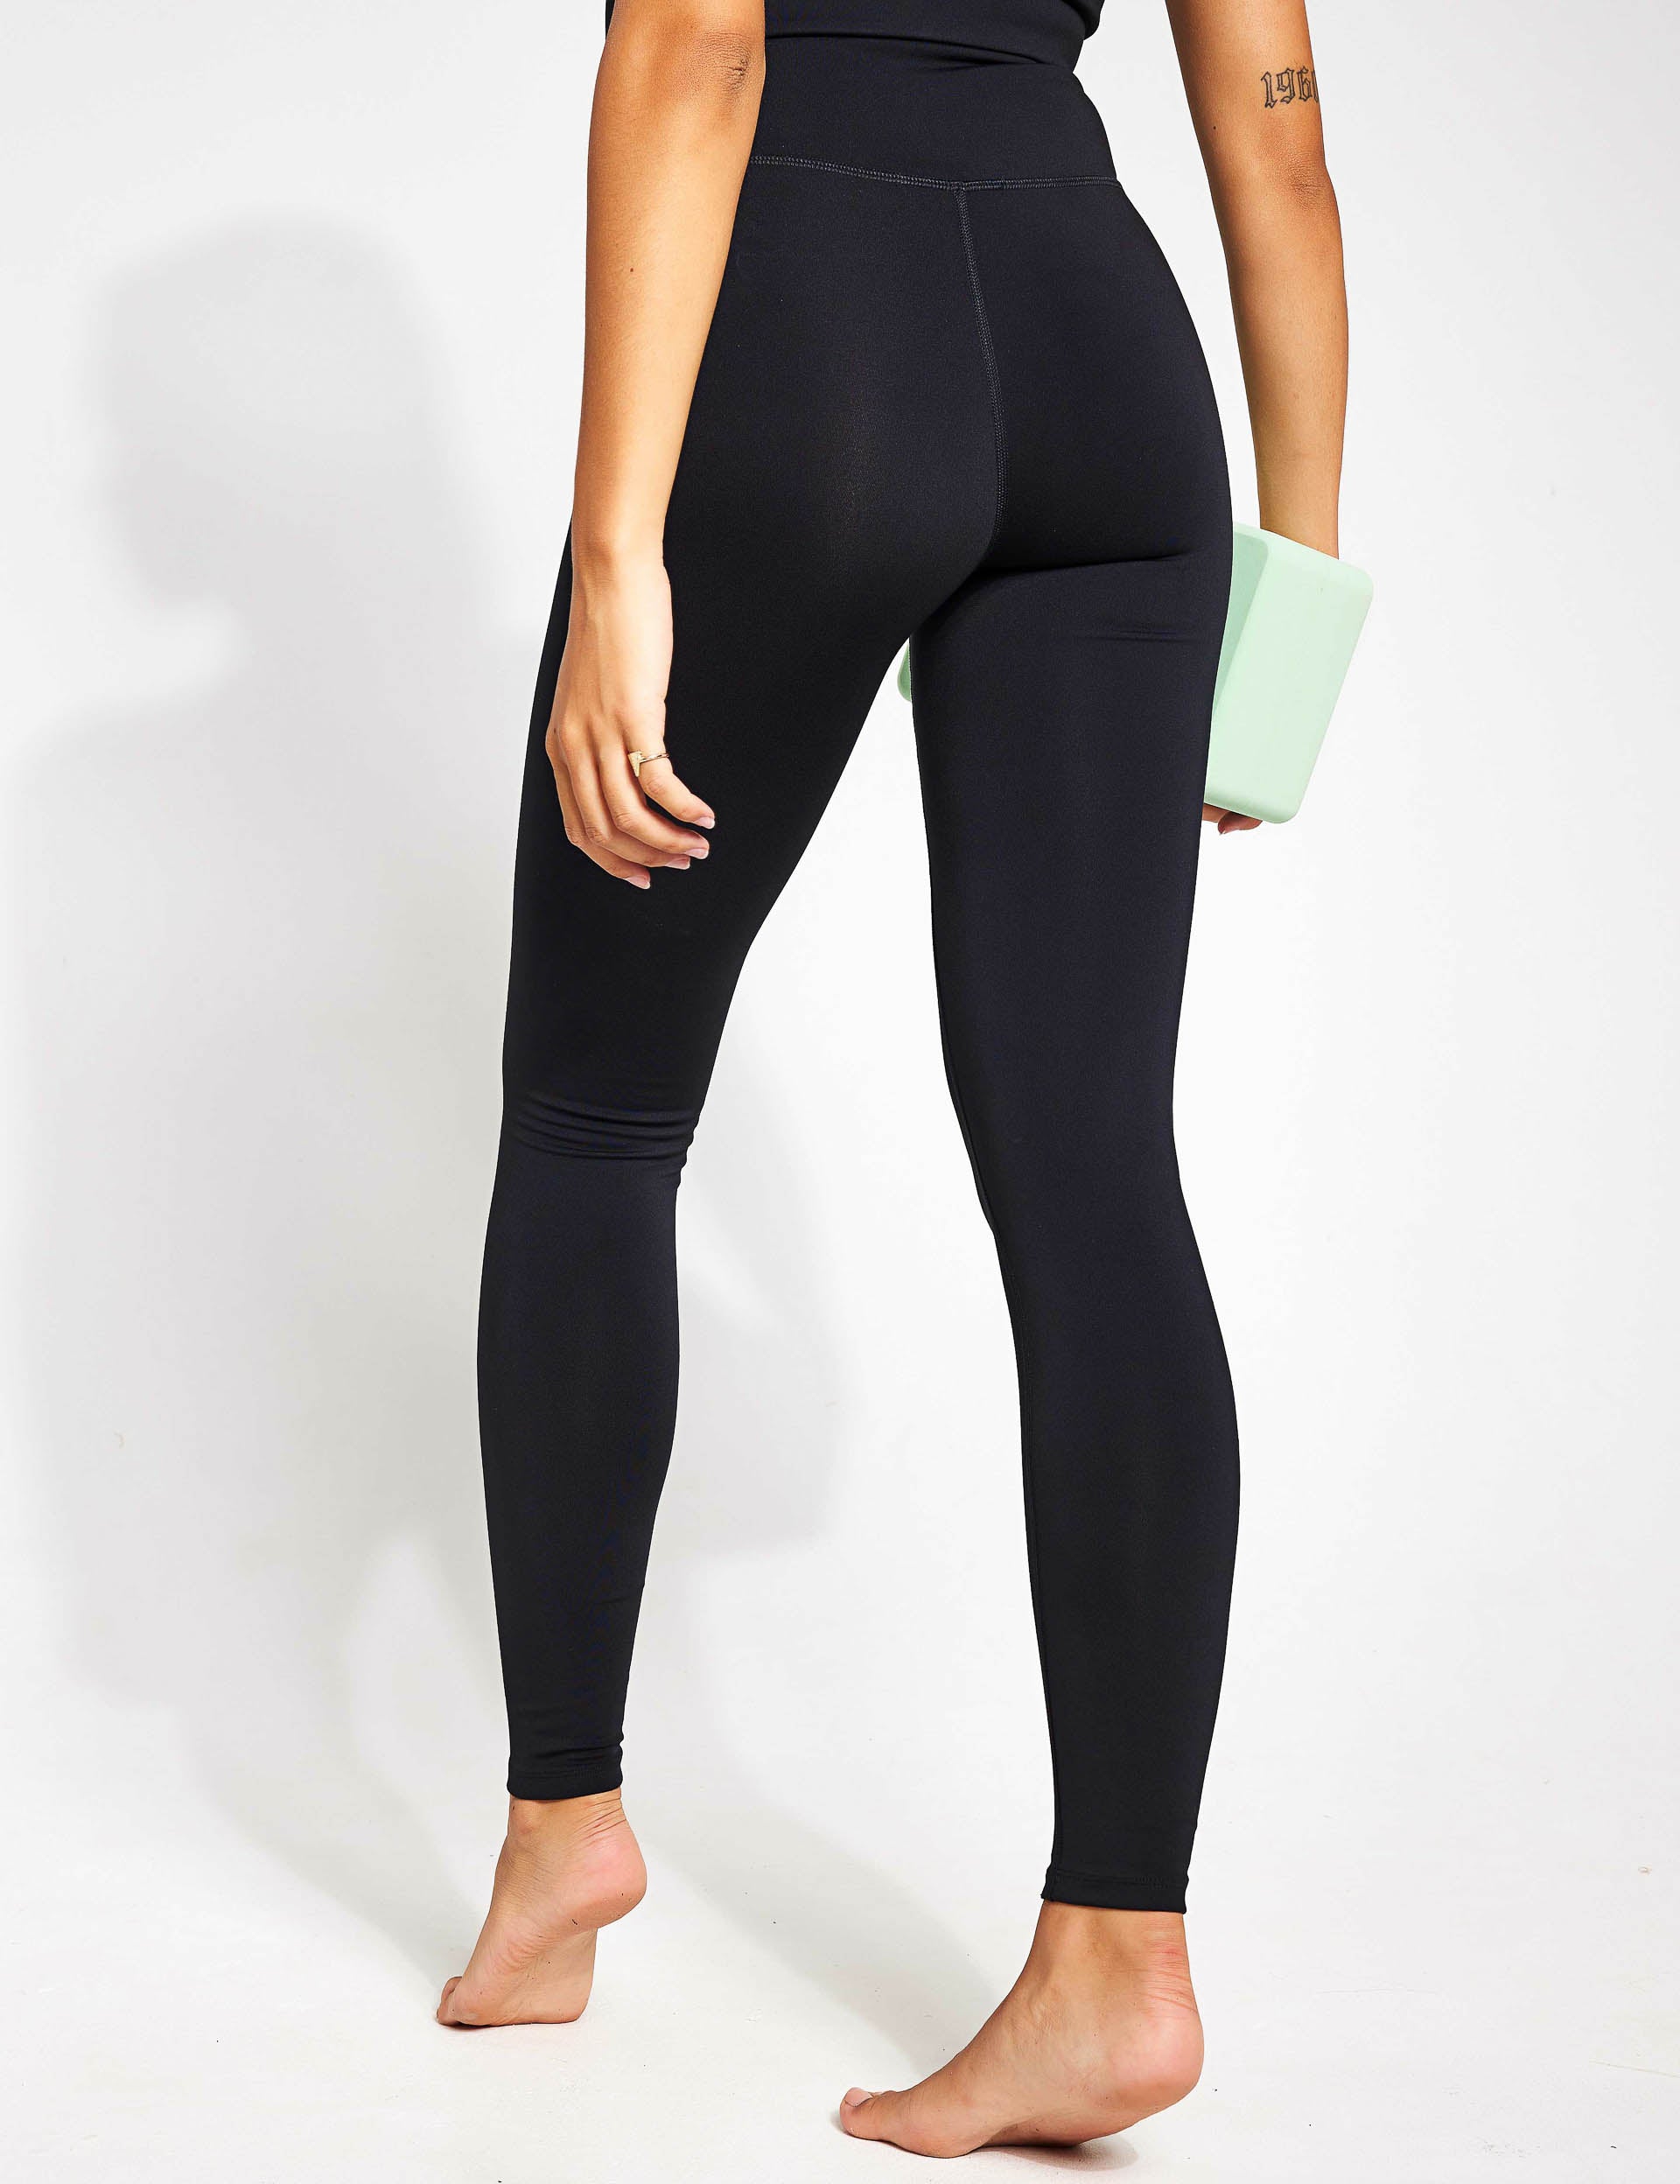 3,000+ Shoppers Bought These Now-$15 Amazon Leggings in the Past Month